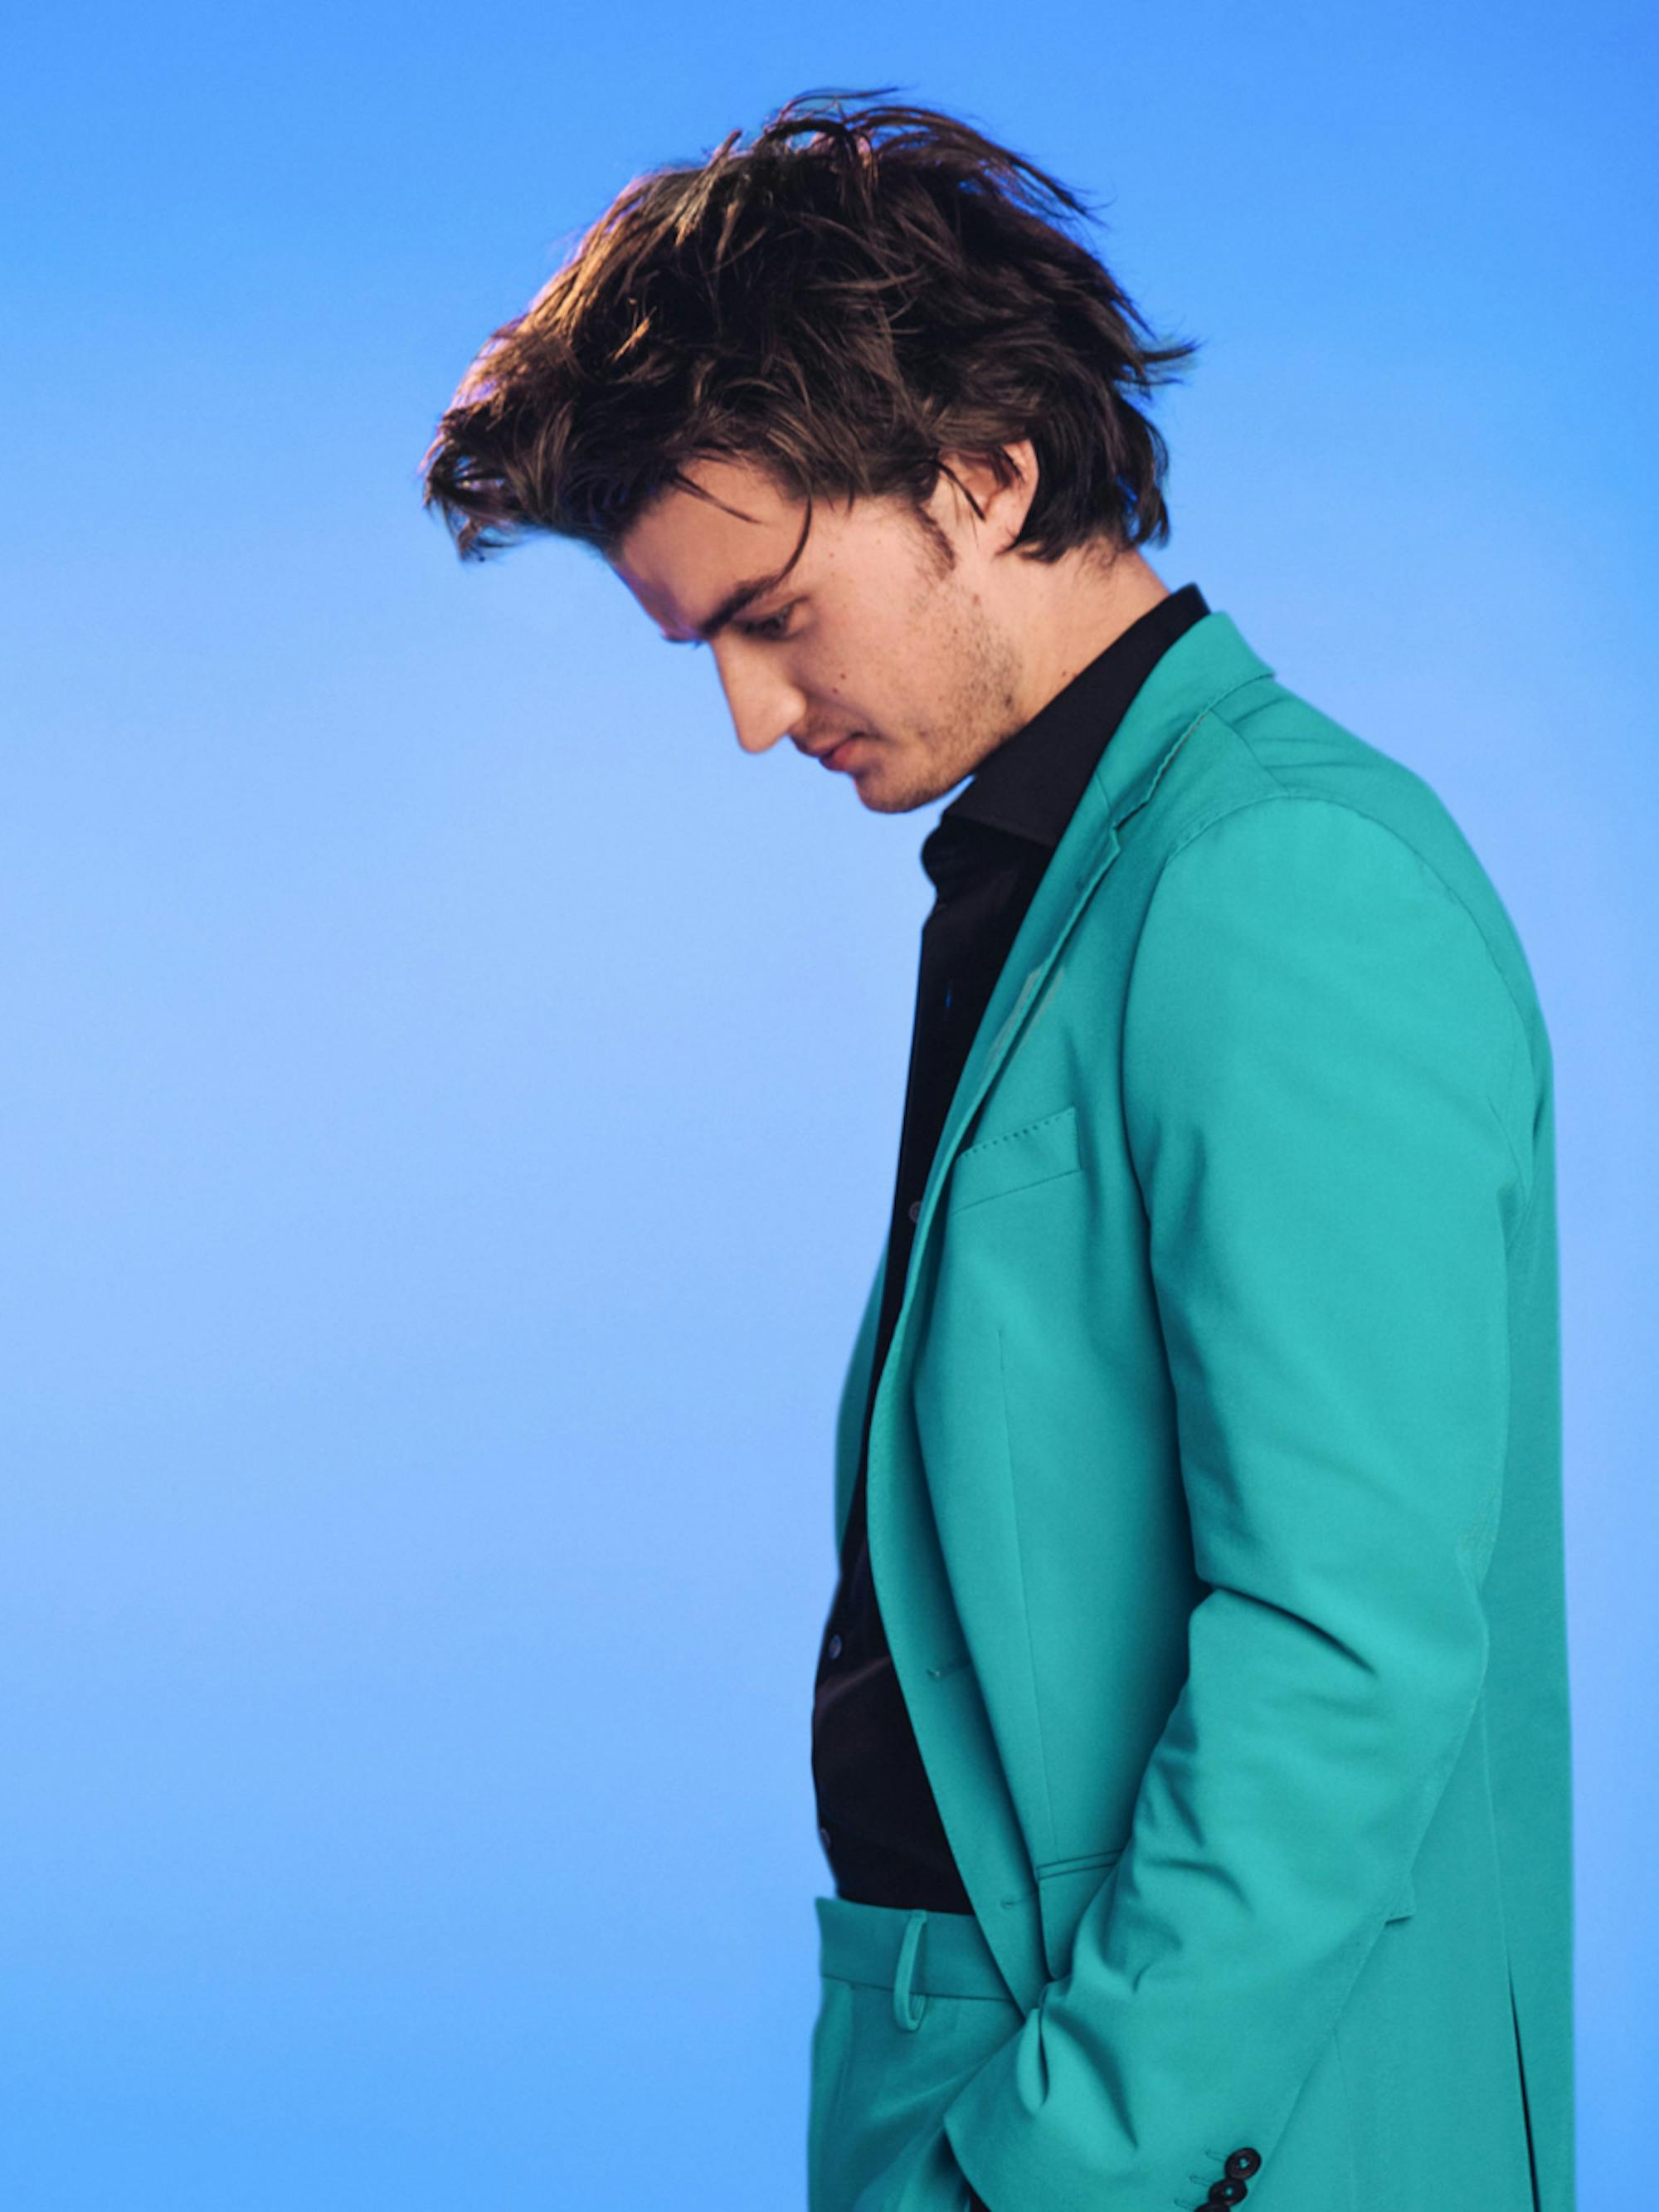 Joe Keery of Stranger Things poses in front of a sky blue background.